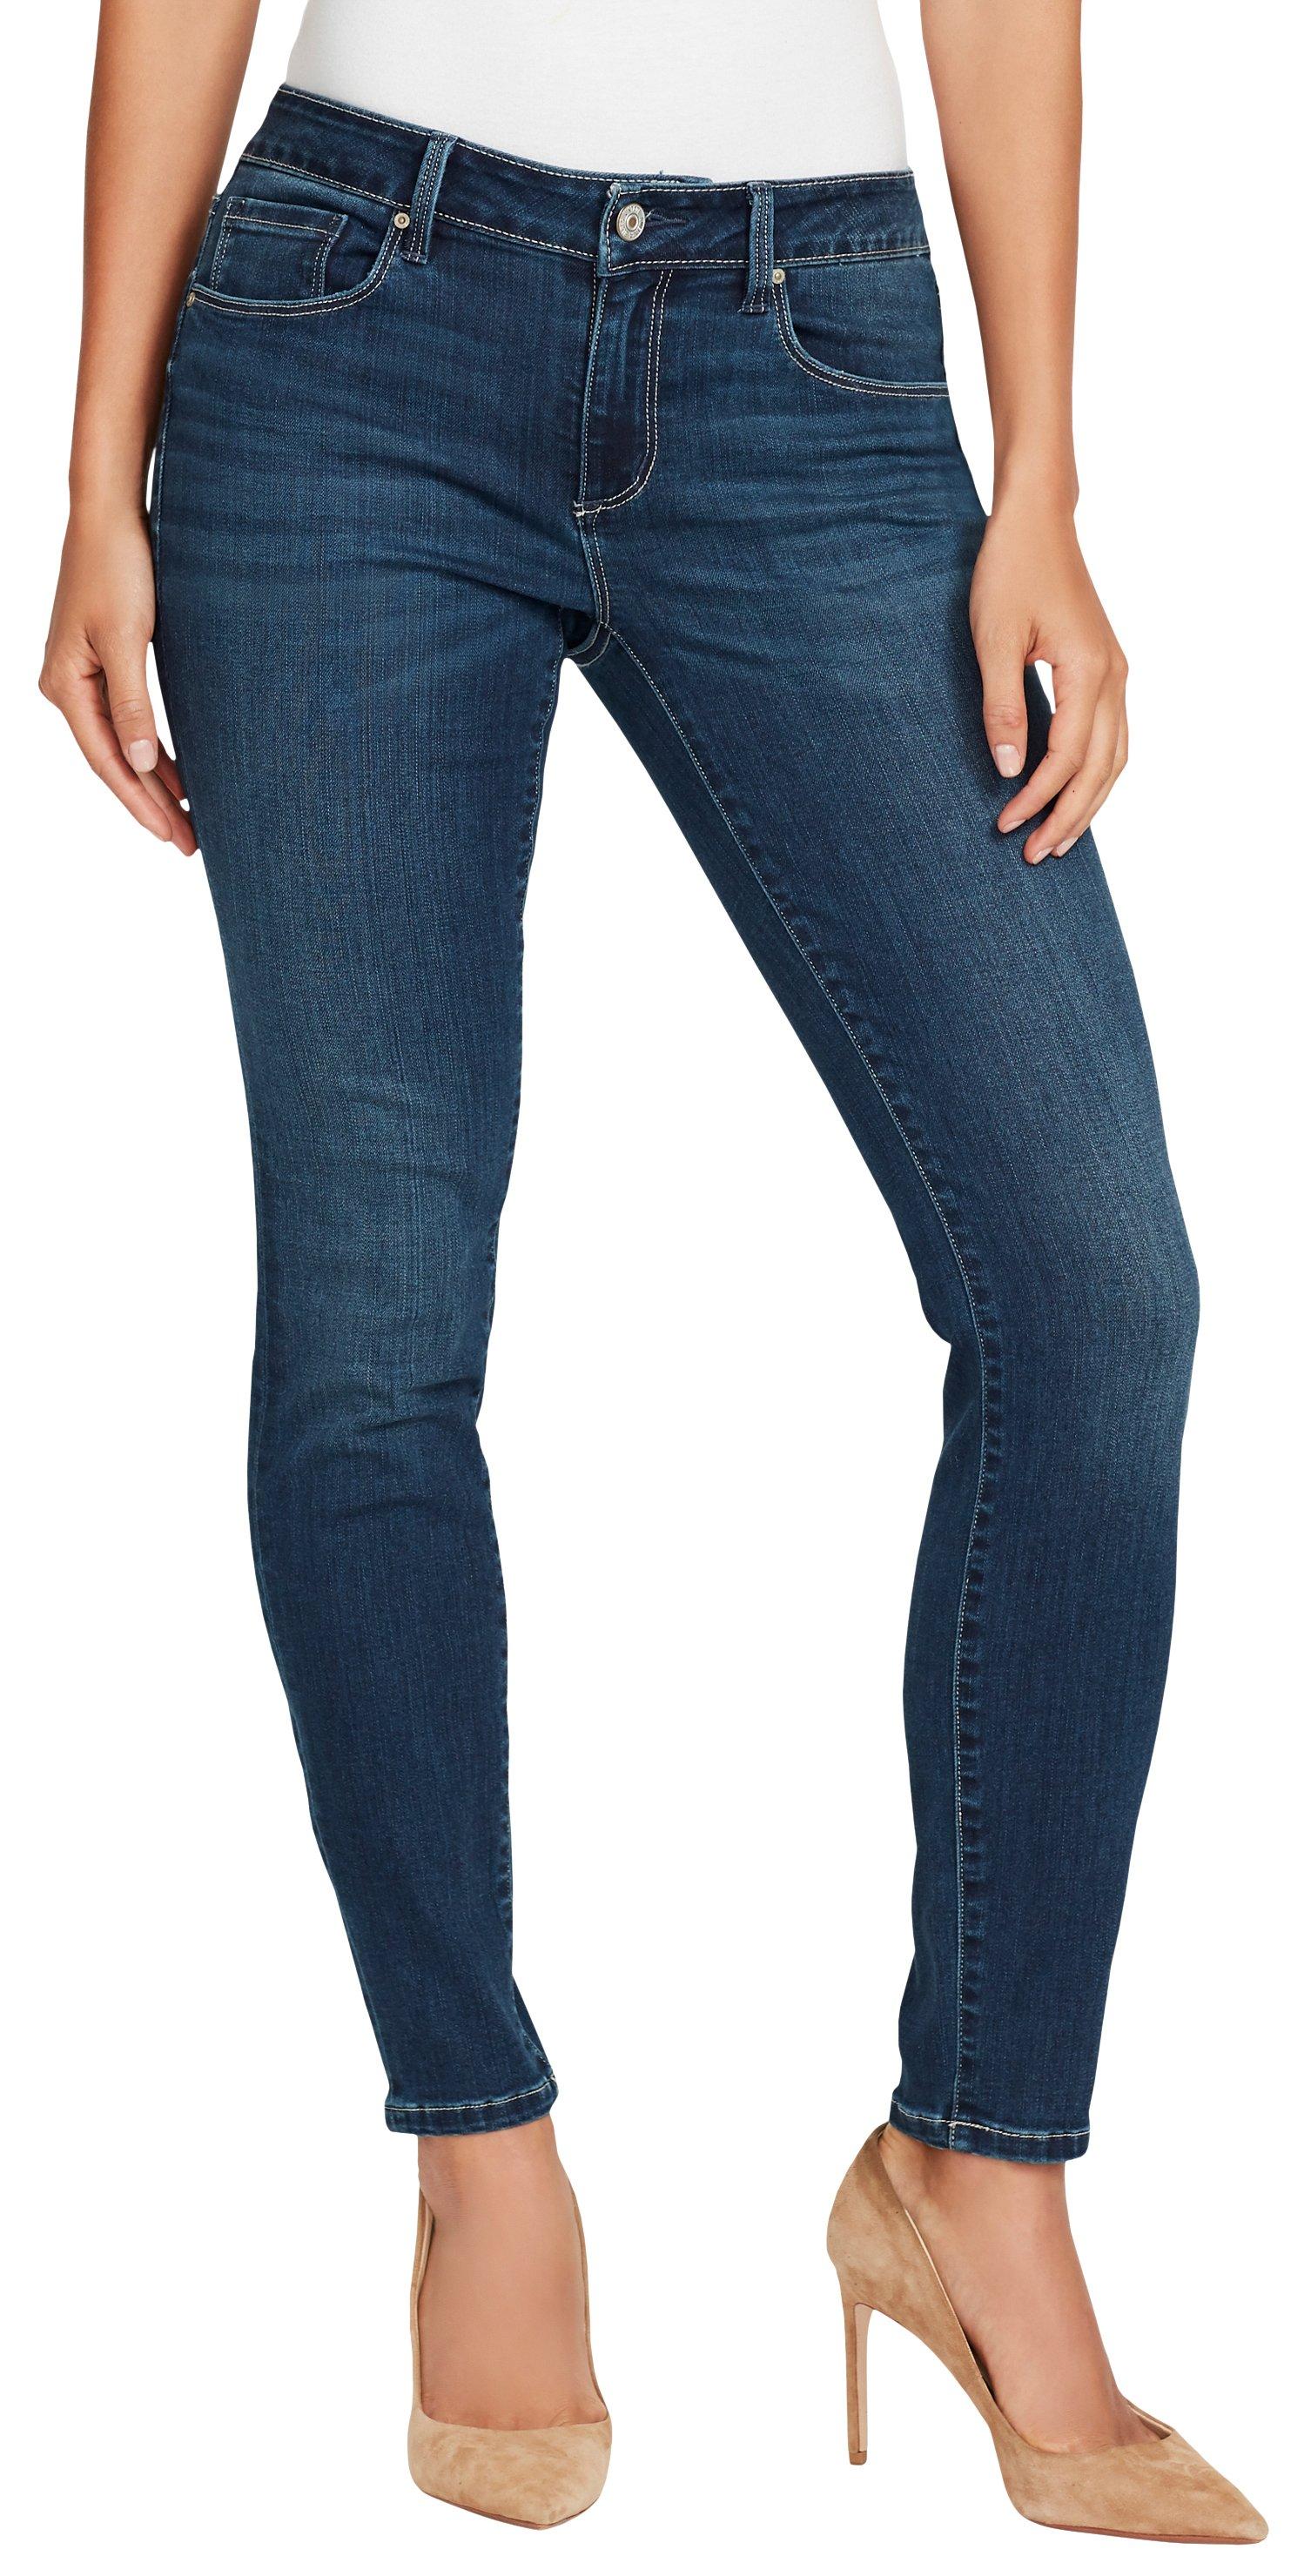 Jeans for Women | Skinny, Ankle, Bootcut, Straight Styles | Bealls Florida